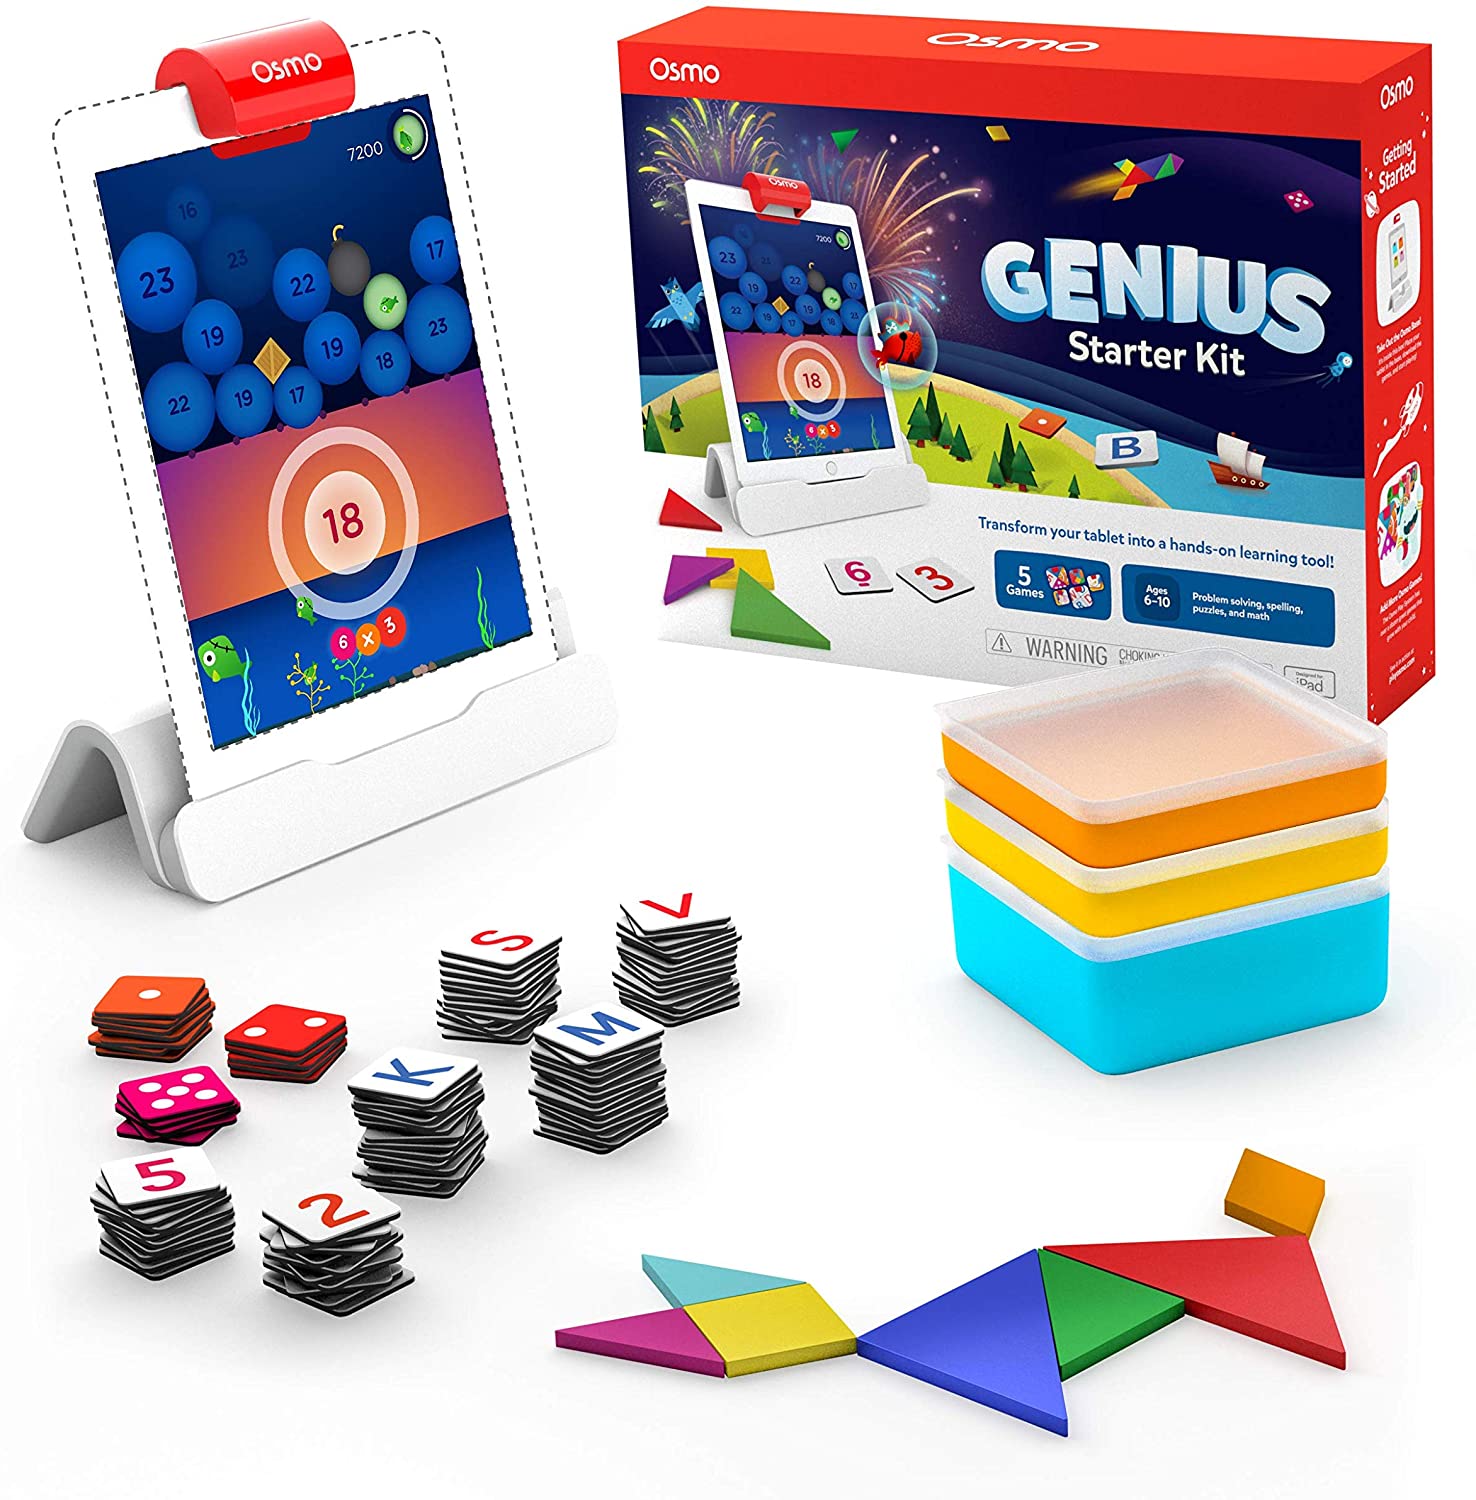 Featured image for “Platz 2 – Osmo Genius Starter Kit (Tangible Play)”